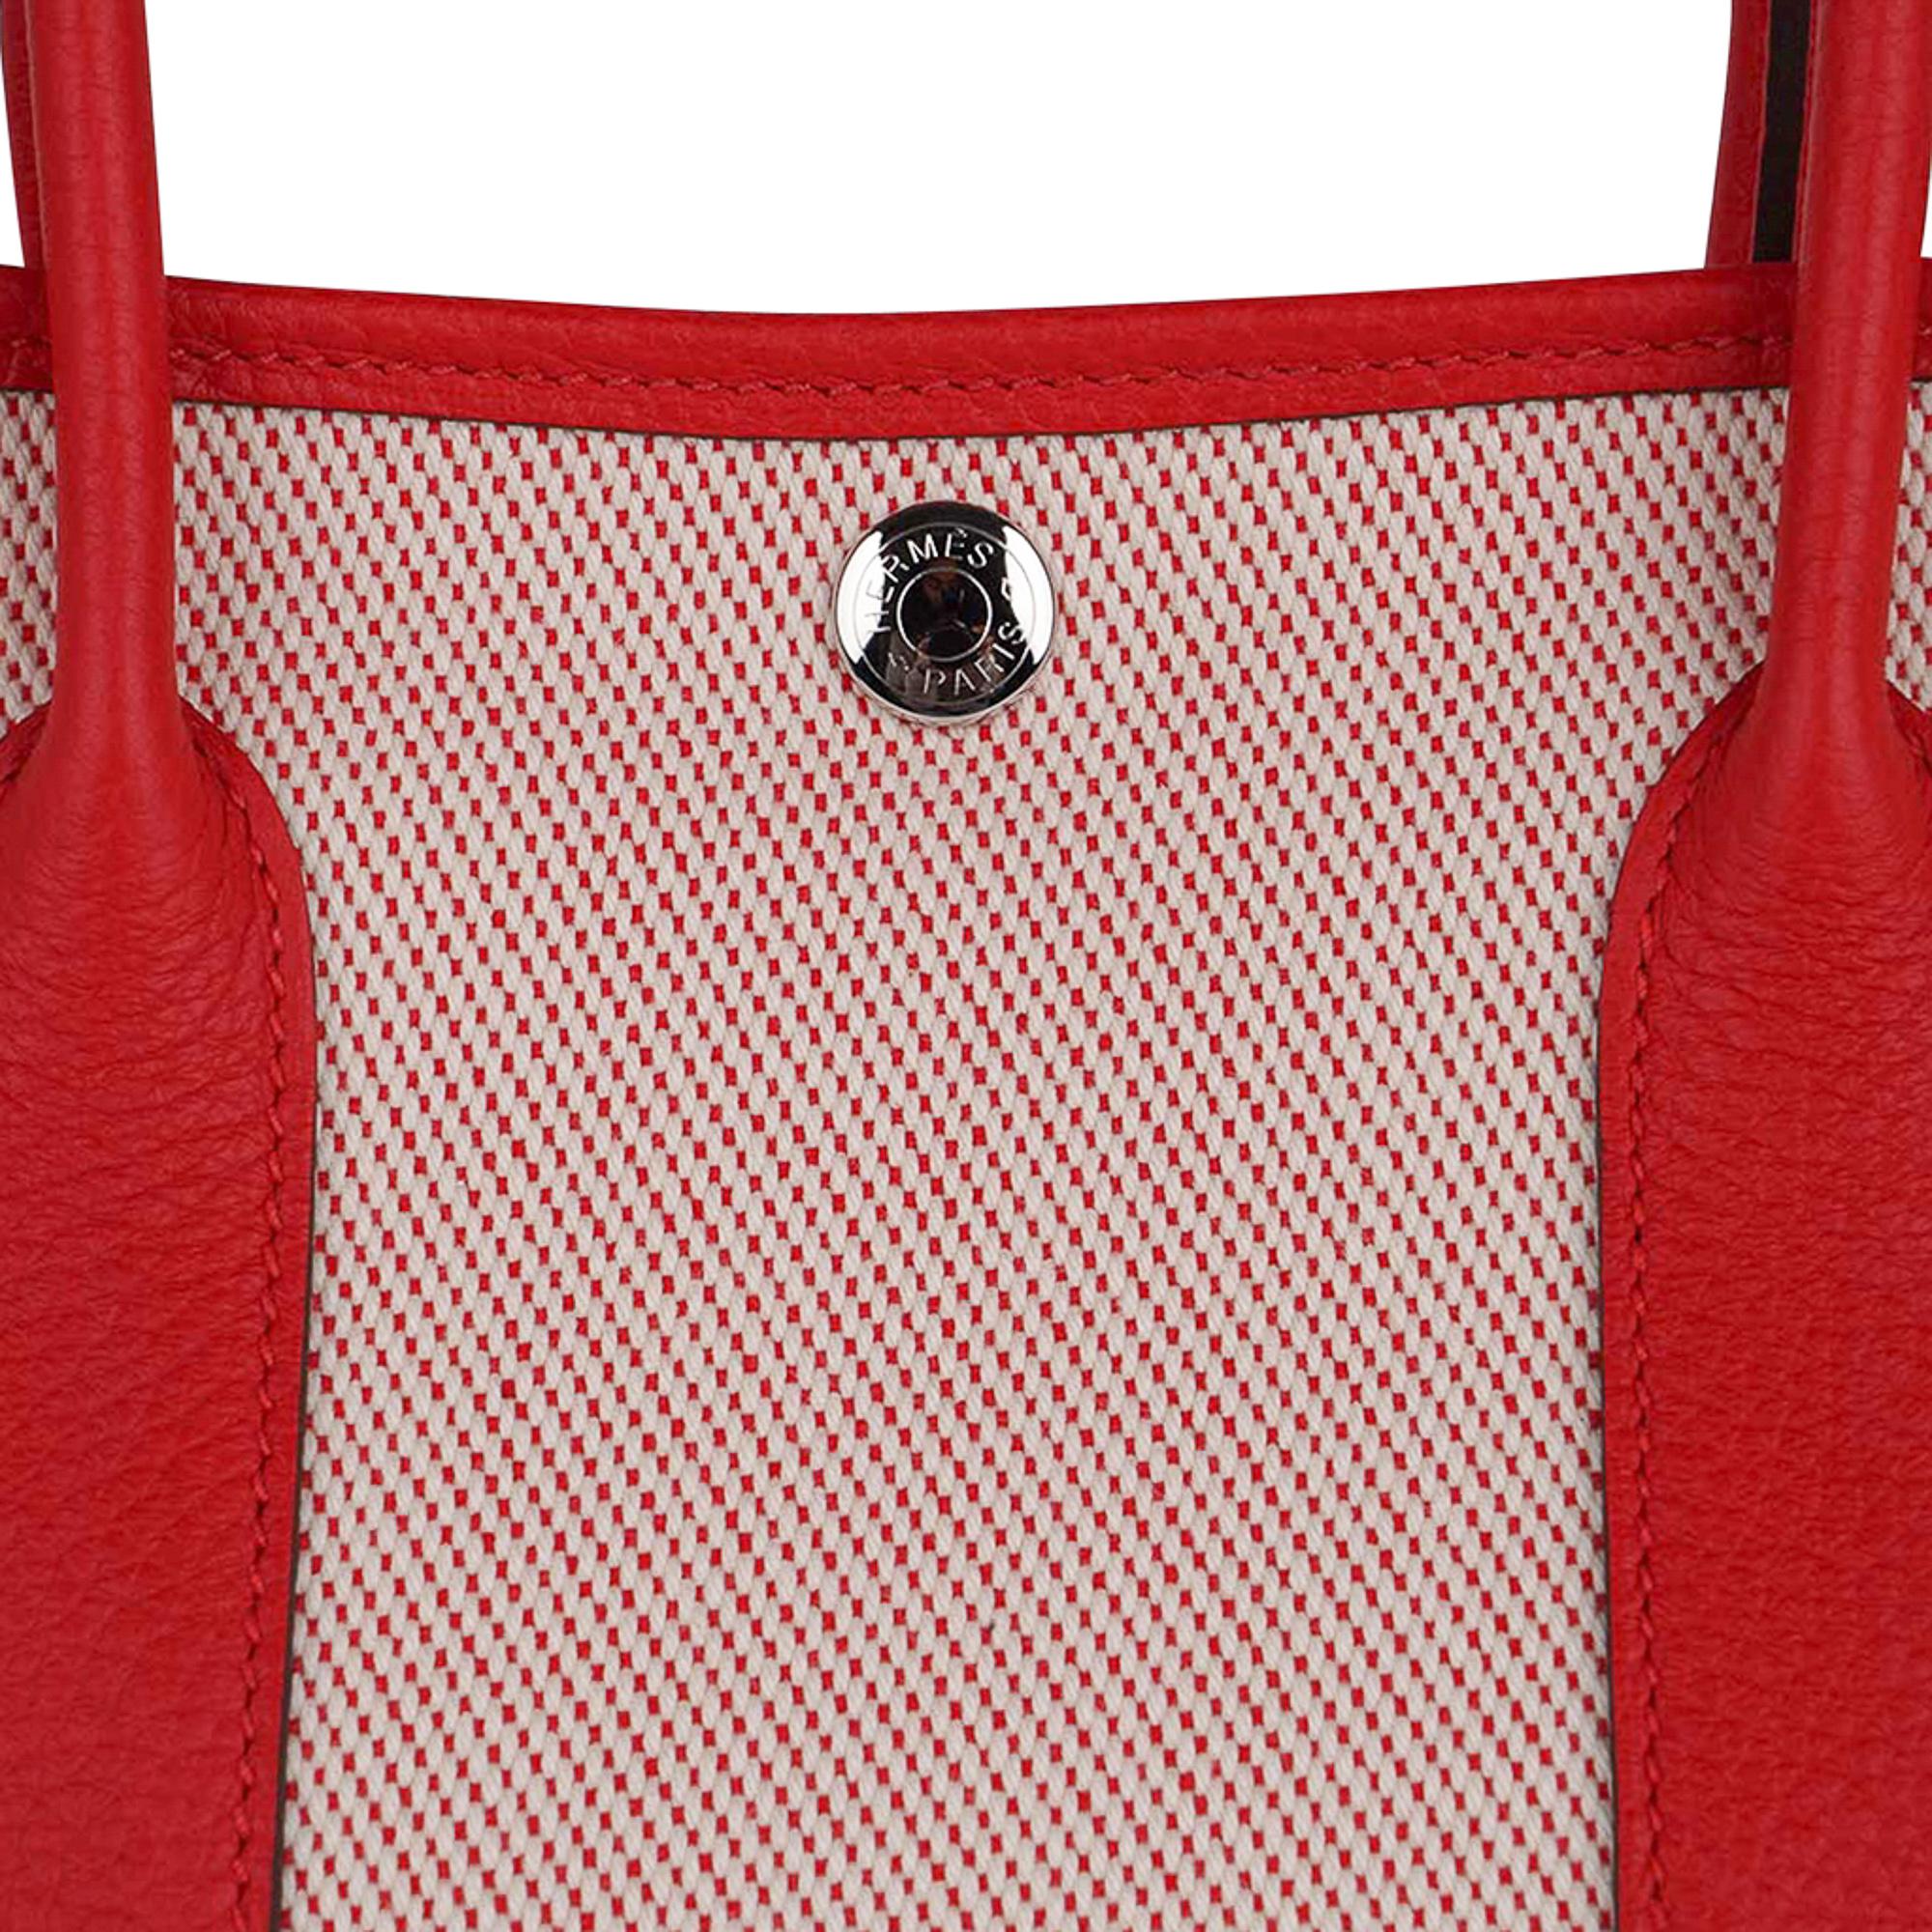 Mightychic offers a guaranteed authentic Hermes Garden Party 30 bag featured in Rouge Grenade with Toile H and Vache Country leather.
Accentuated with palladium Clou de Selle.
Rouge canvas lining and interior pocket.
Comes with signature Hermes box